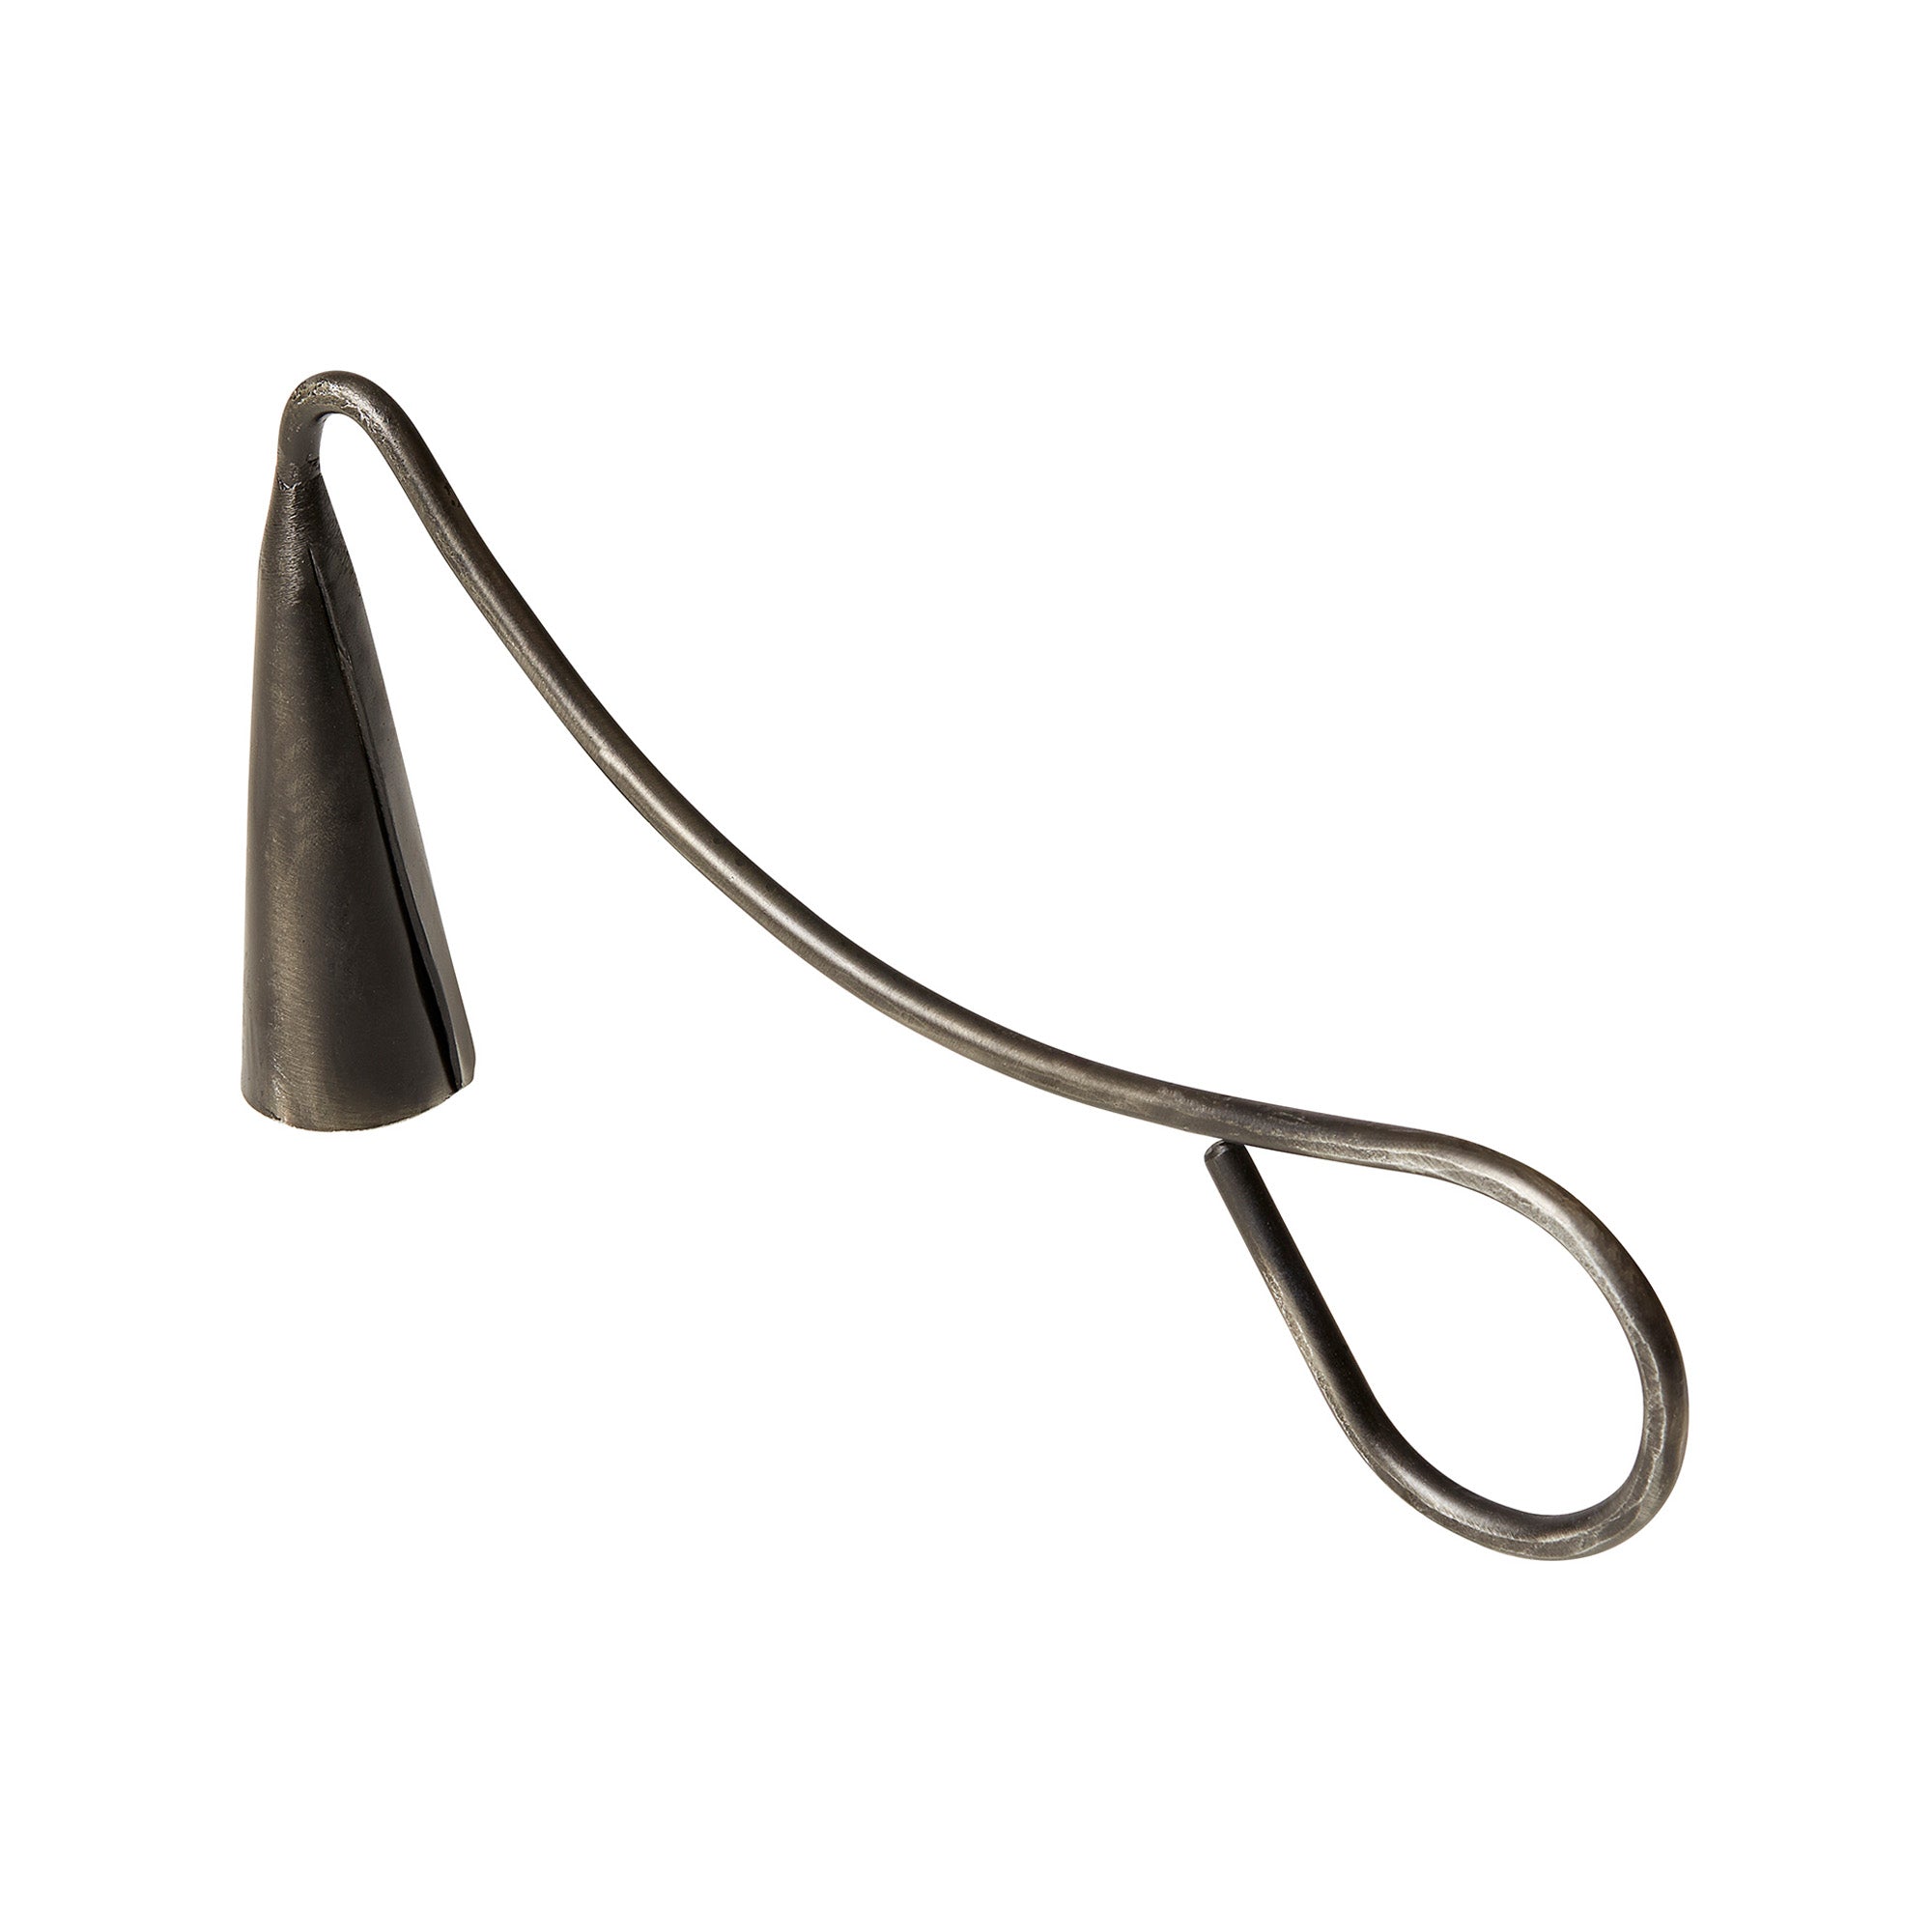 Taava Candle Snuffer